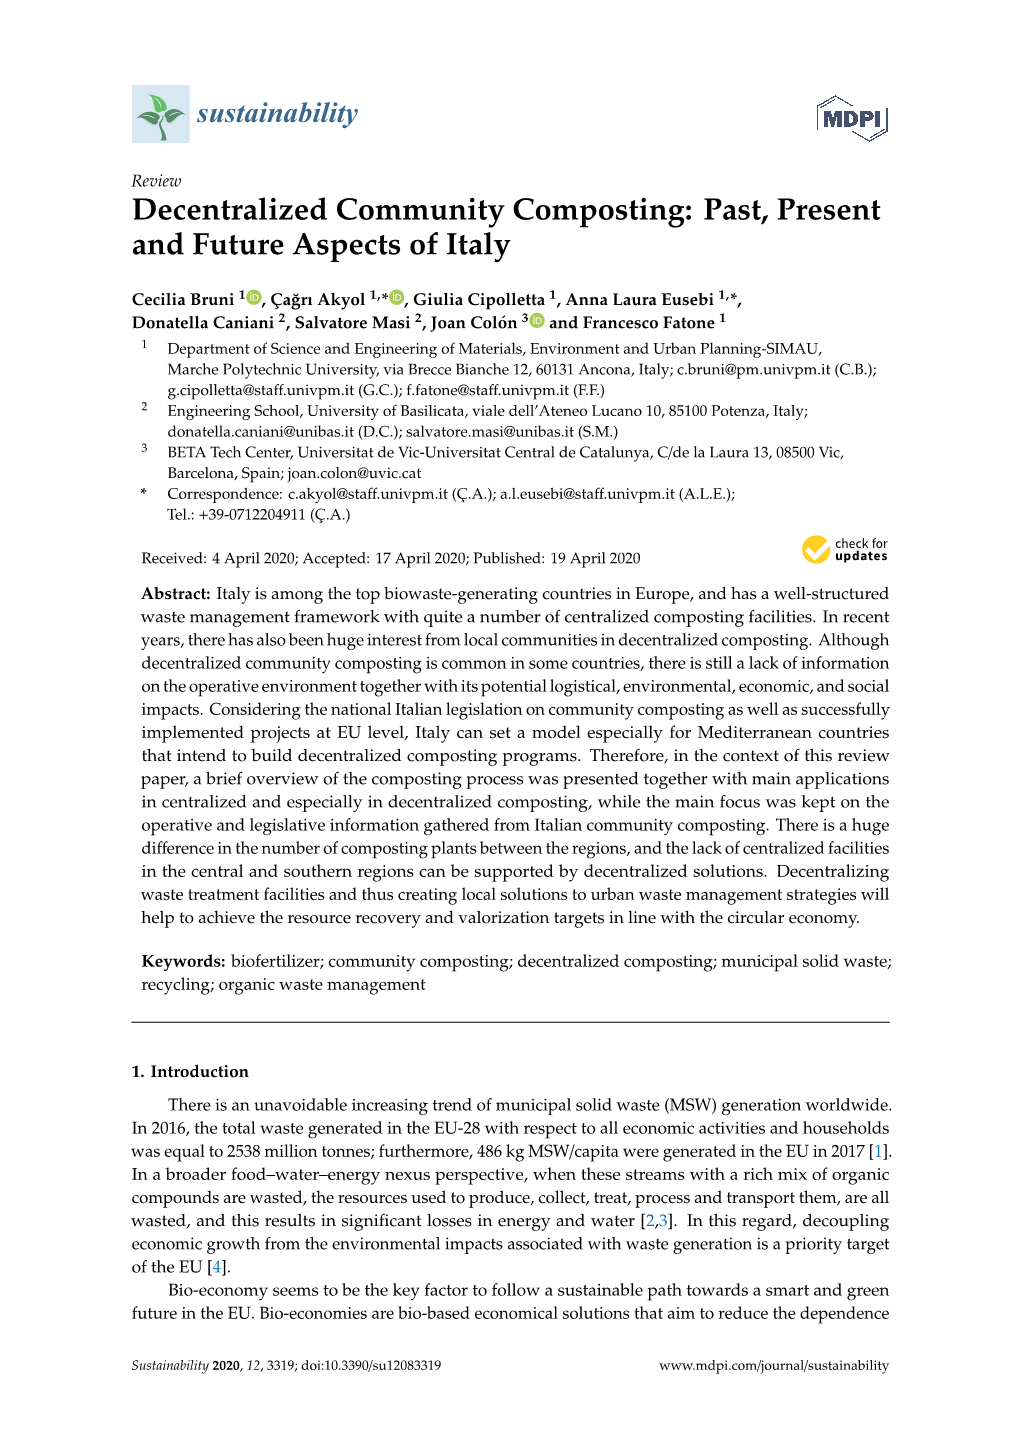 Decentralized Community Composting: Past, Present and Future Aspects of Italy